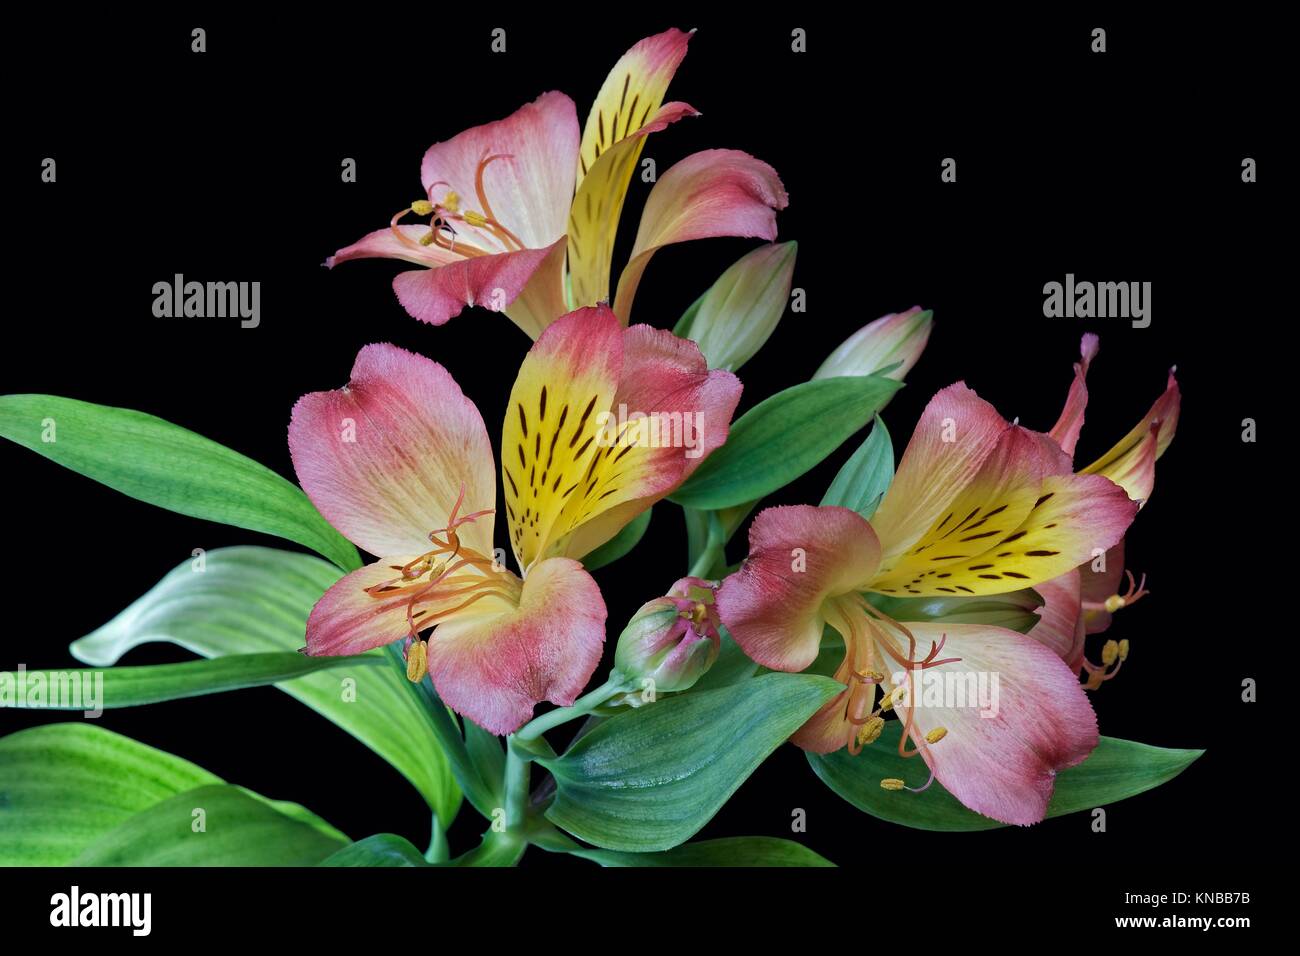 Peruvian lily (Alstroemeria x hybrid). Called Lily of the Incas also. Image of flowers on black background. Stock Photo